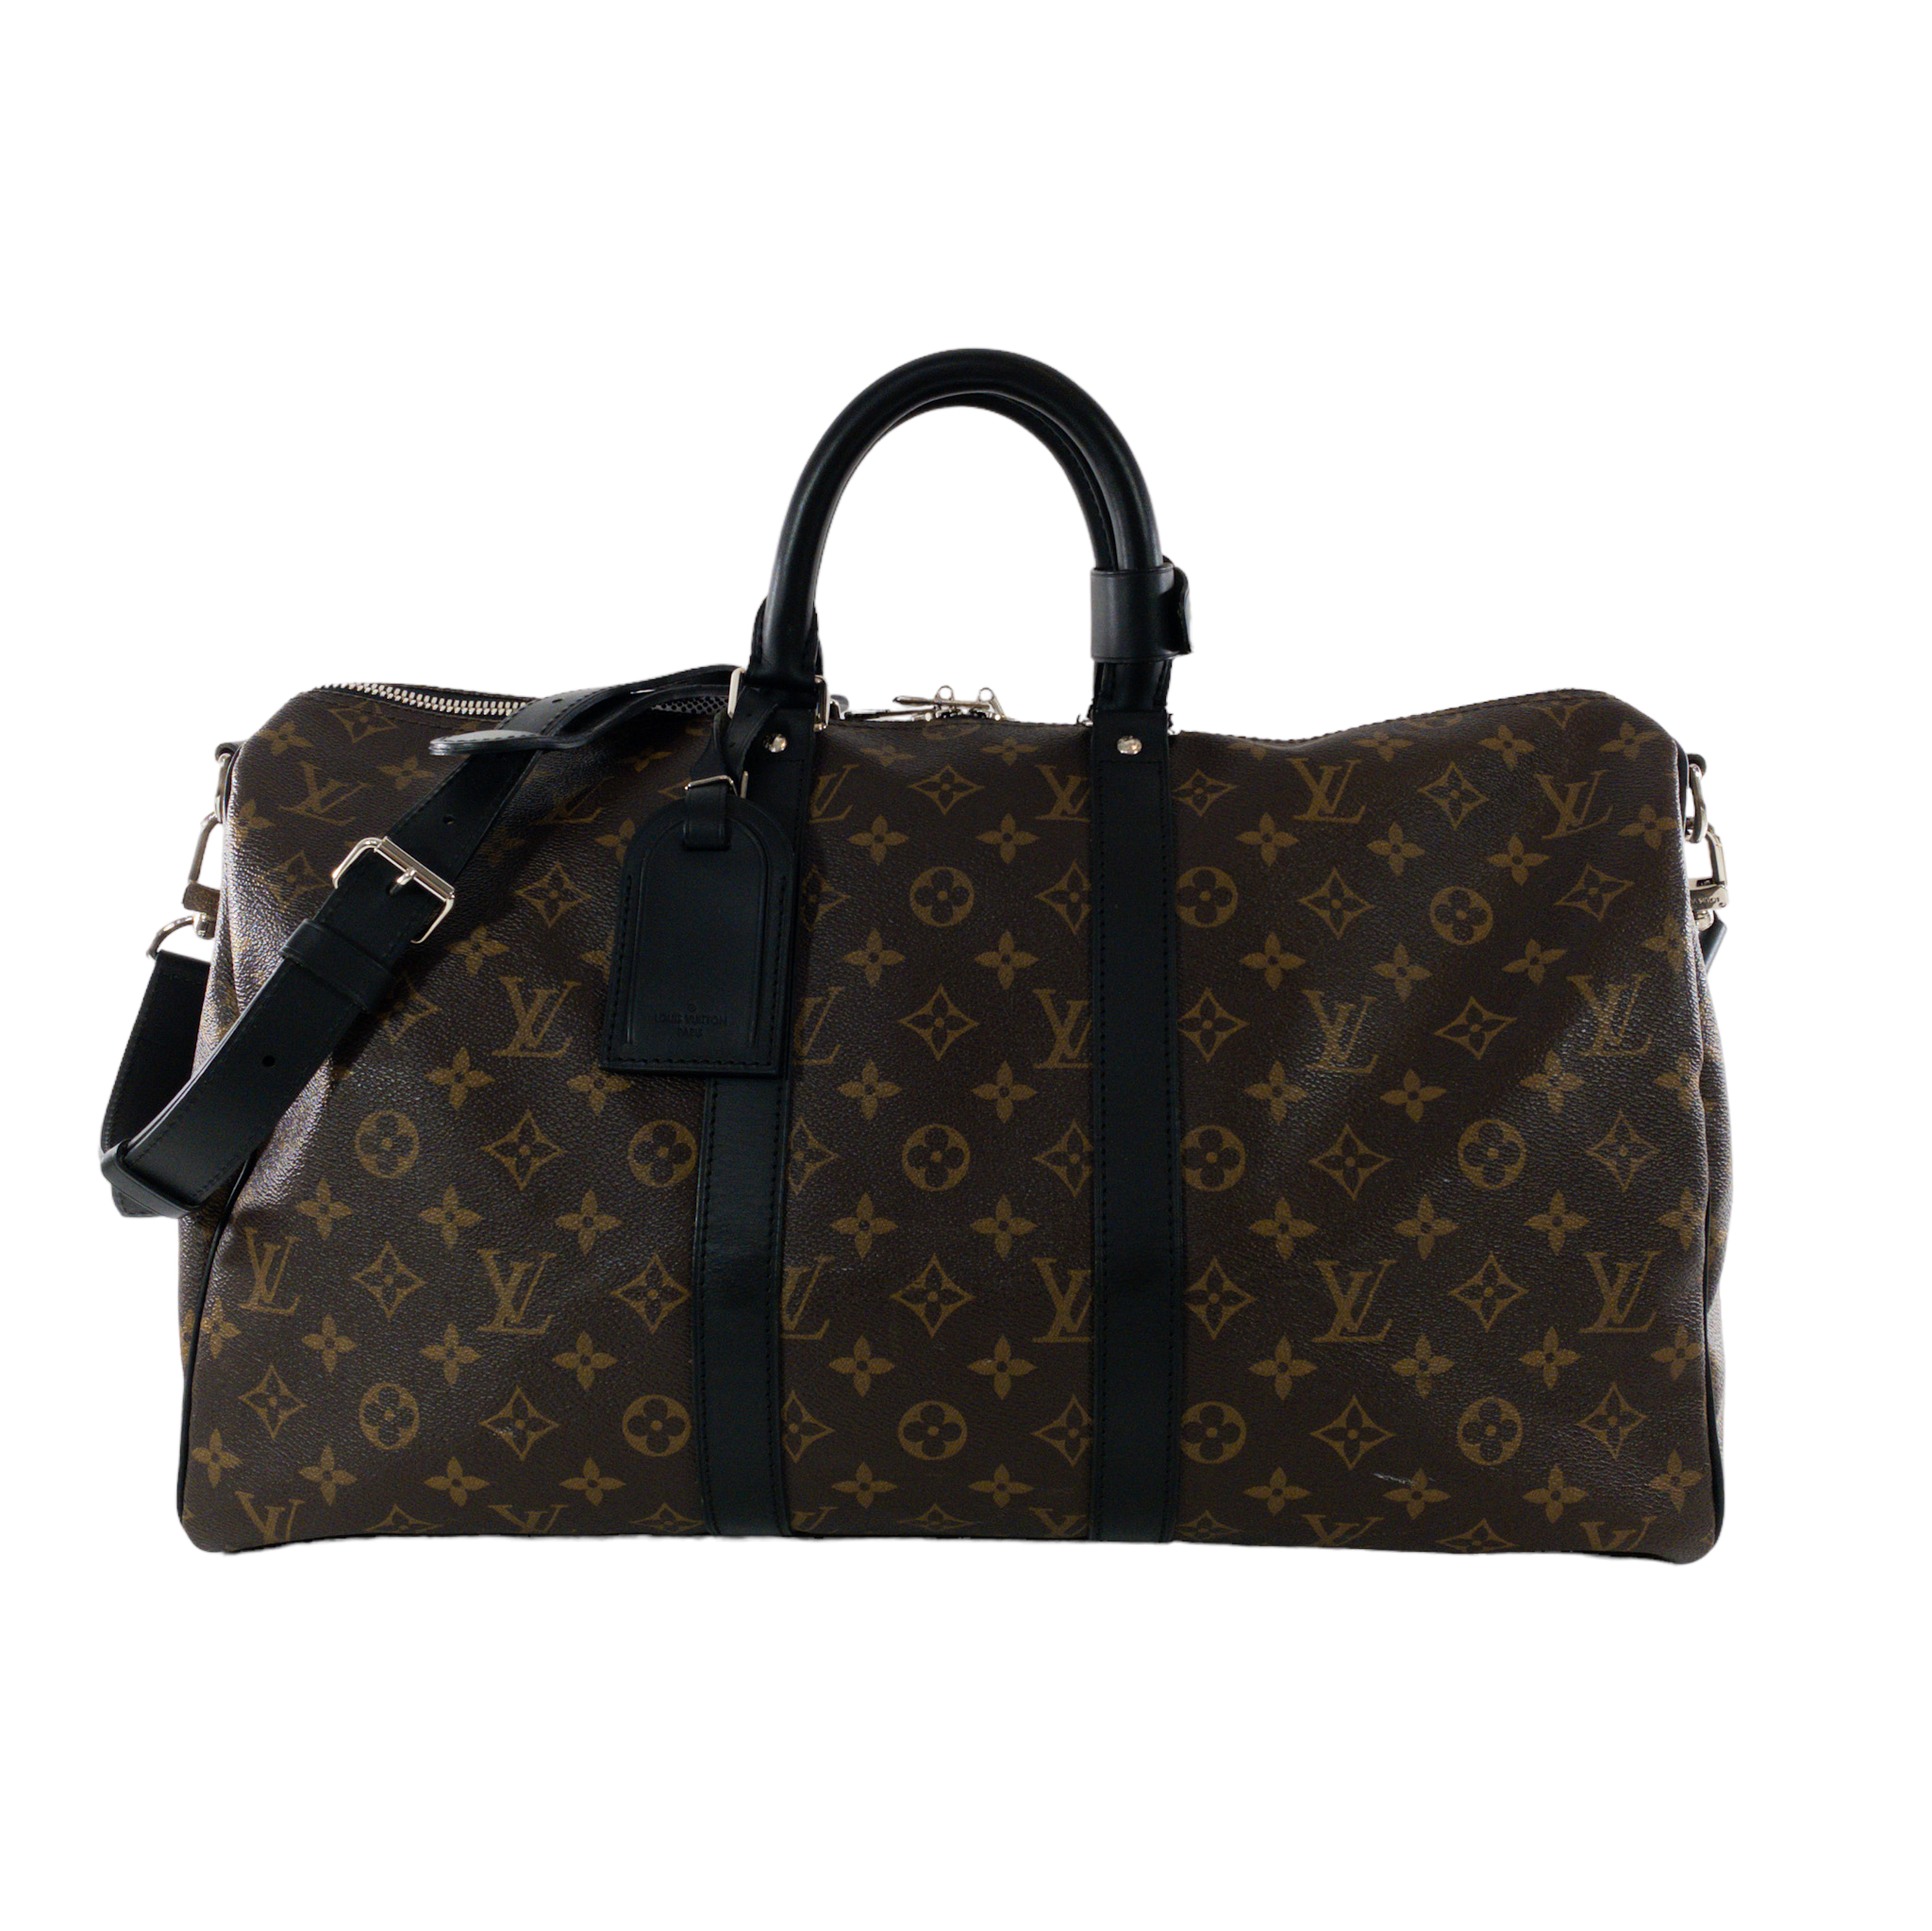 LOUIS VUITTON KEEPALL BANDOULIERE 45: IN DEPTH REVIEW (MONOGRAM